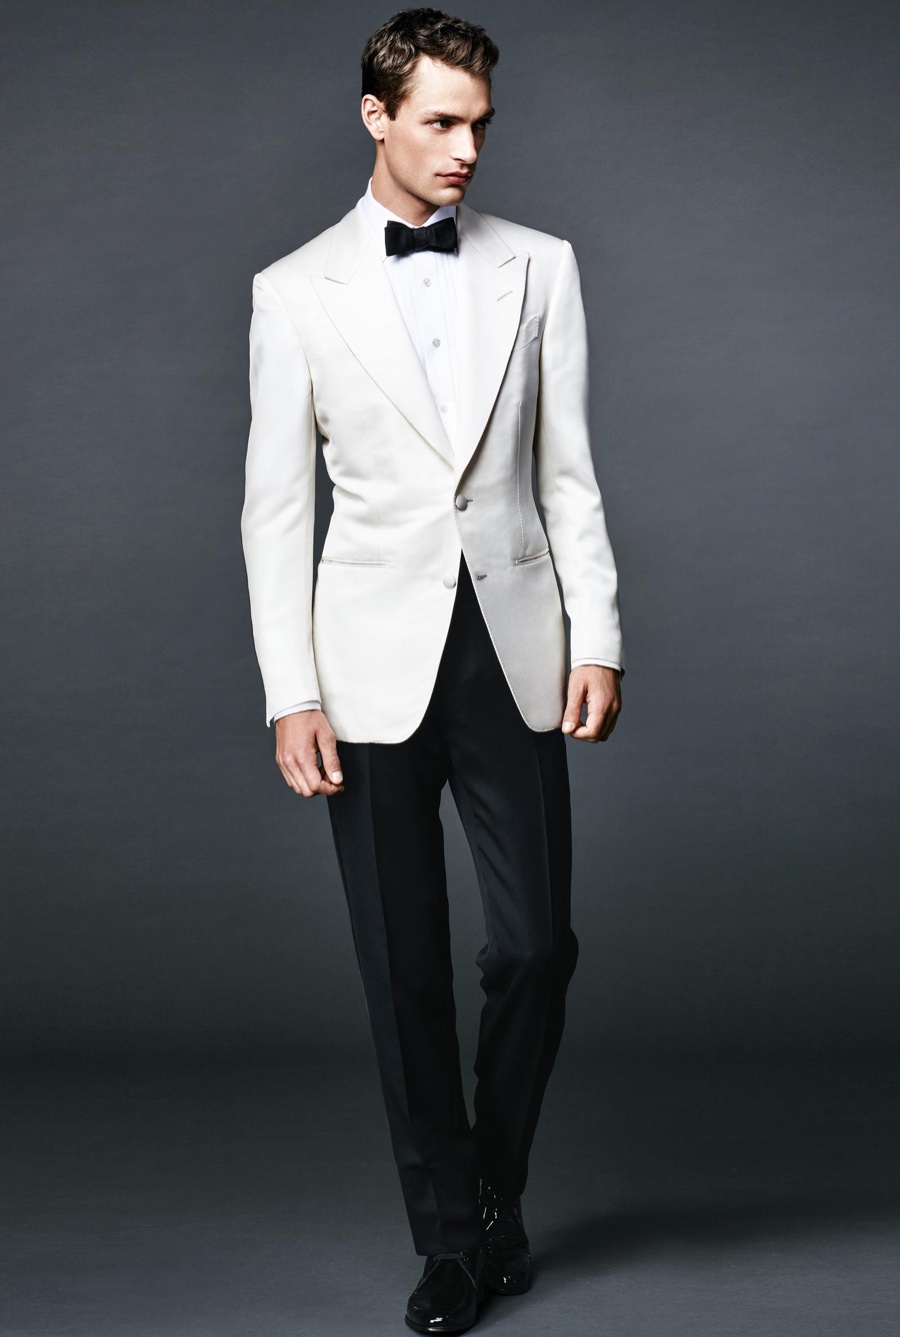 Bond Suits: Tom Ford 2015 Capsule Collection